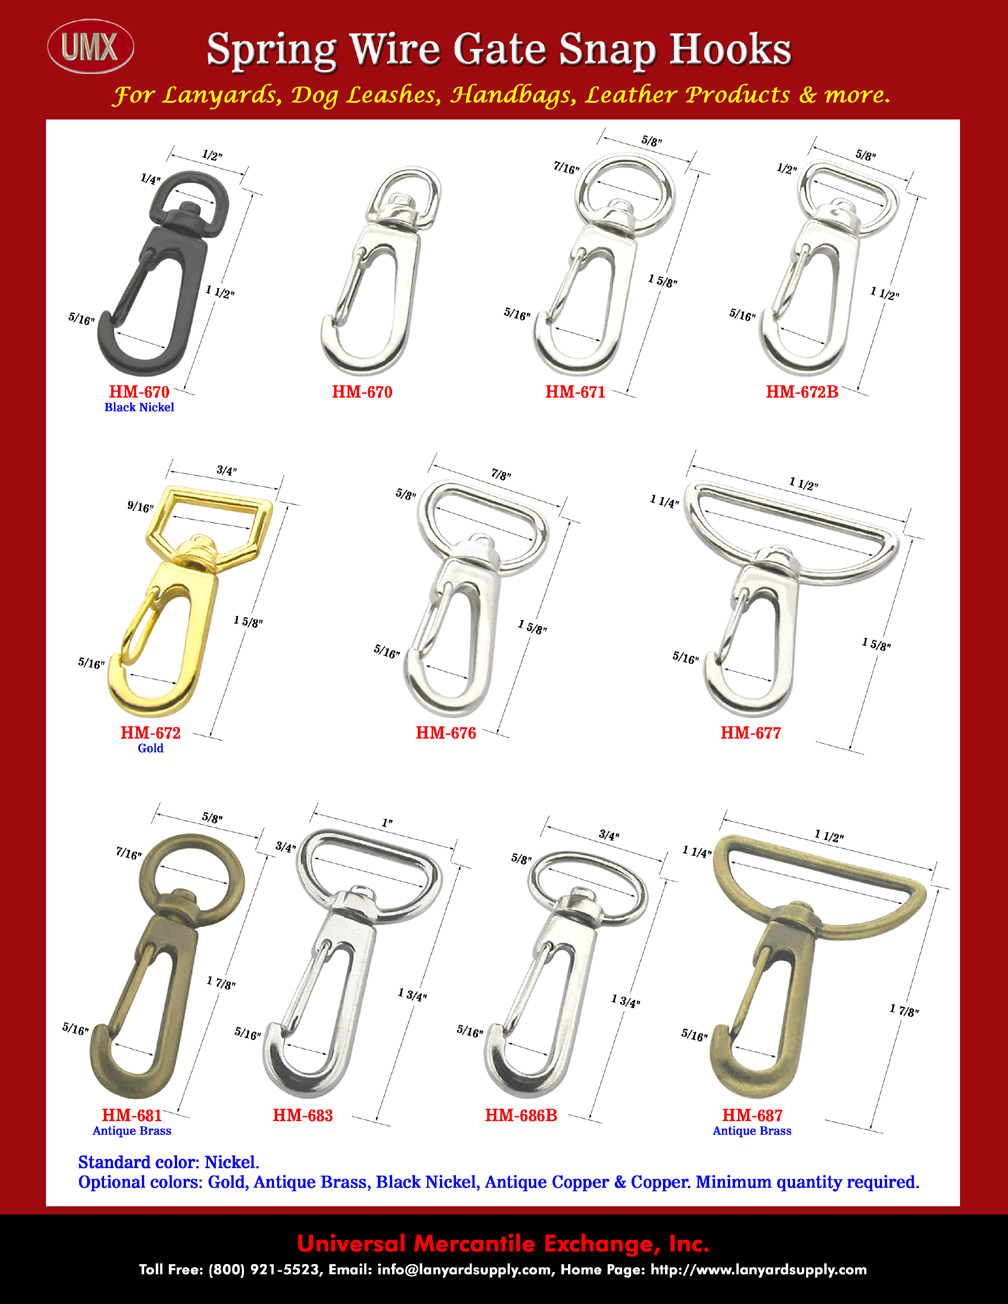 We keep nickel color bolt snaps in stock as our standard color items. but sometime we will have some extra colors line gold or antique brass colors available, just give us a call to check what we have.